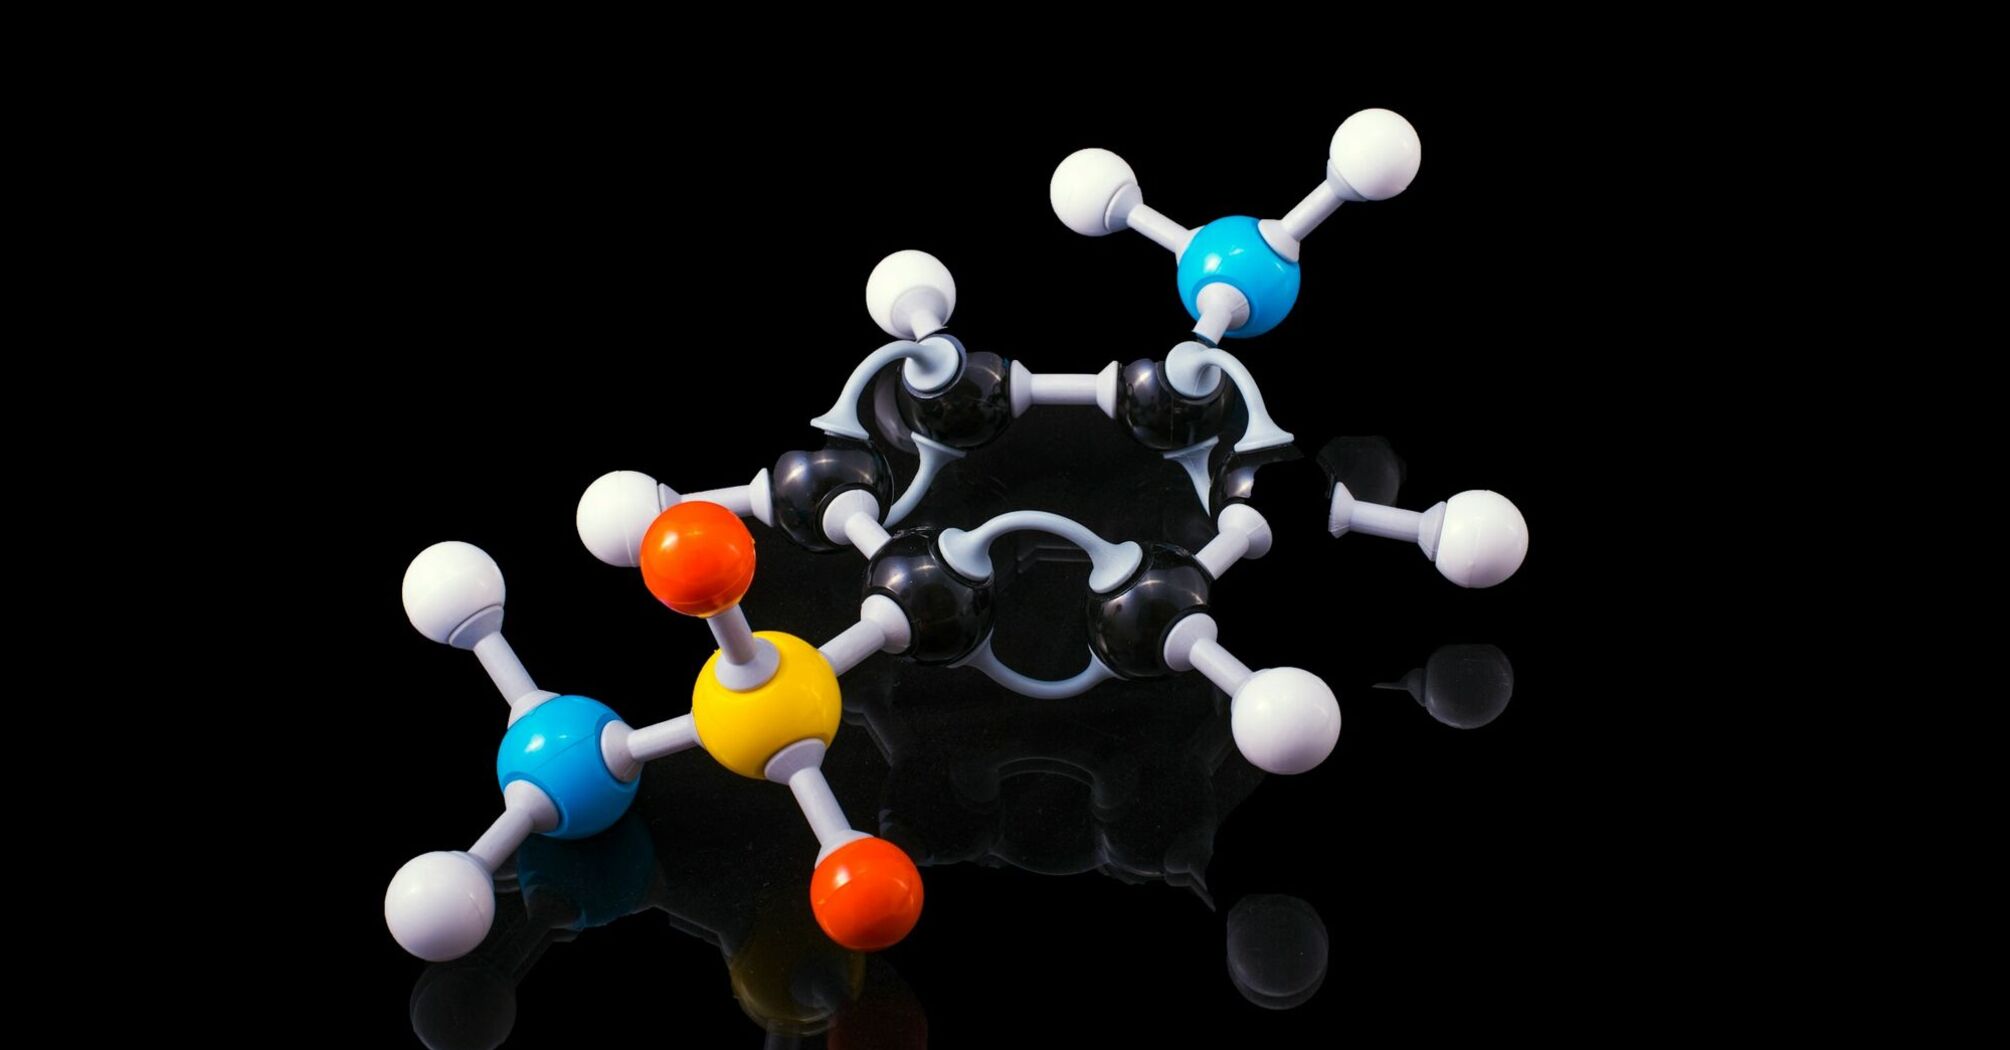 Model of a molecule with colorful balls representing different atoms connected by sticks to illustrate bonds, on a reflective black surface